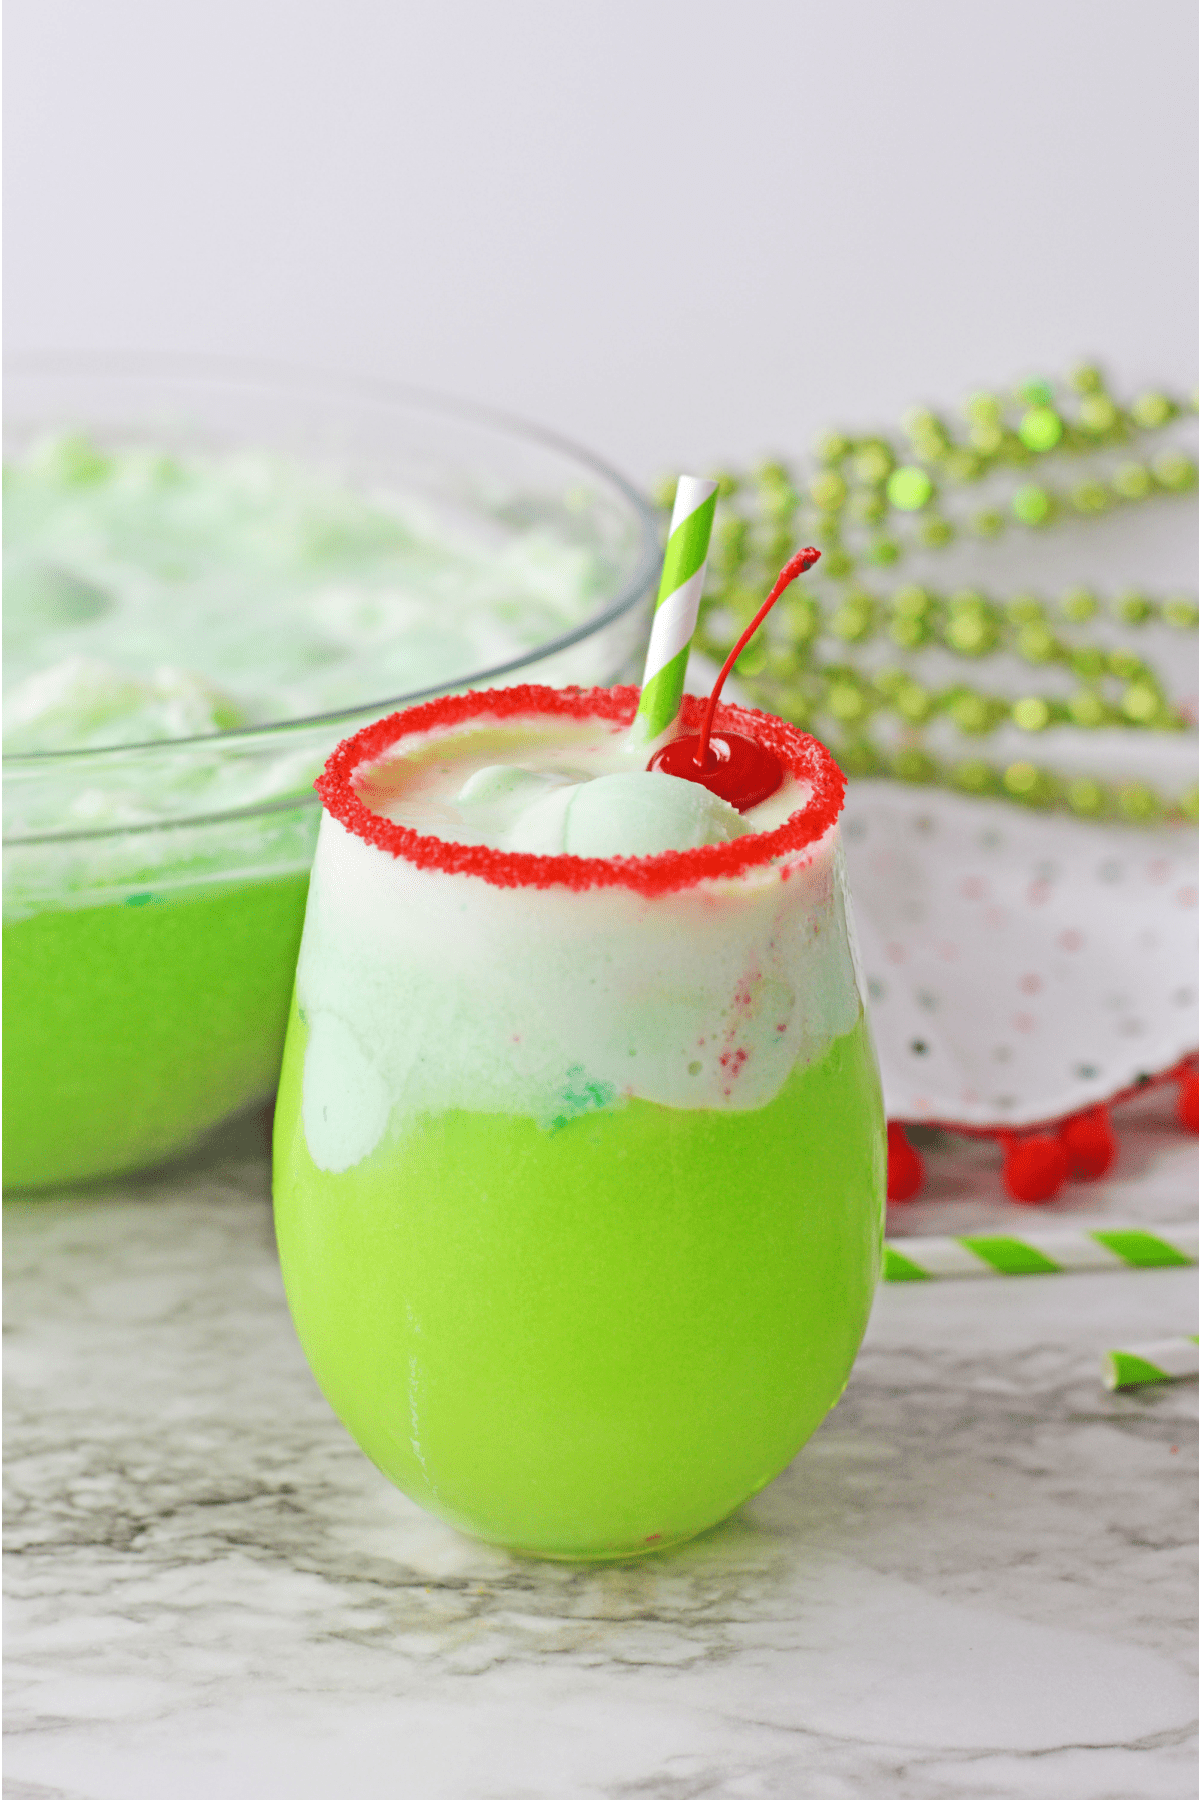 Grinch punch with striped straw